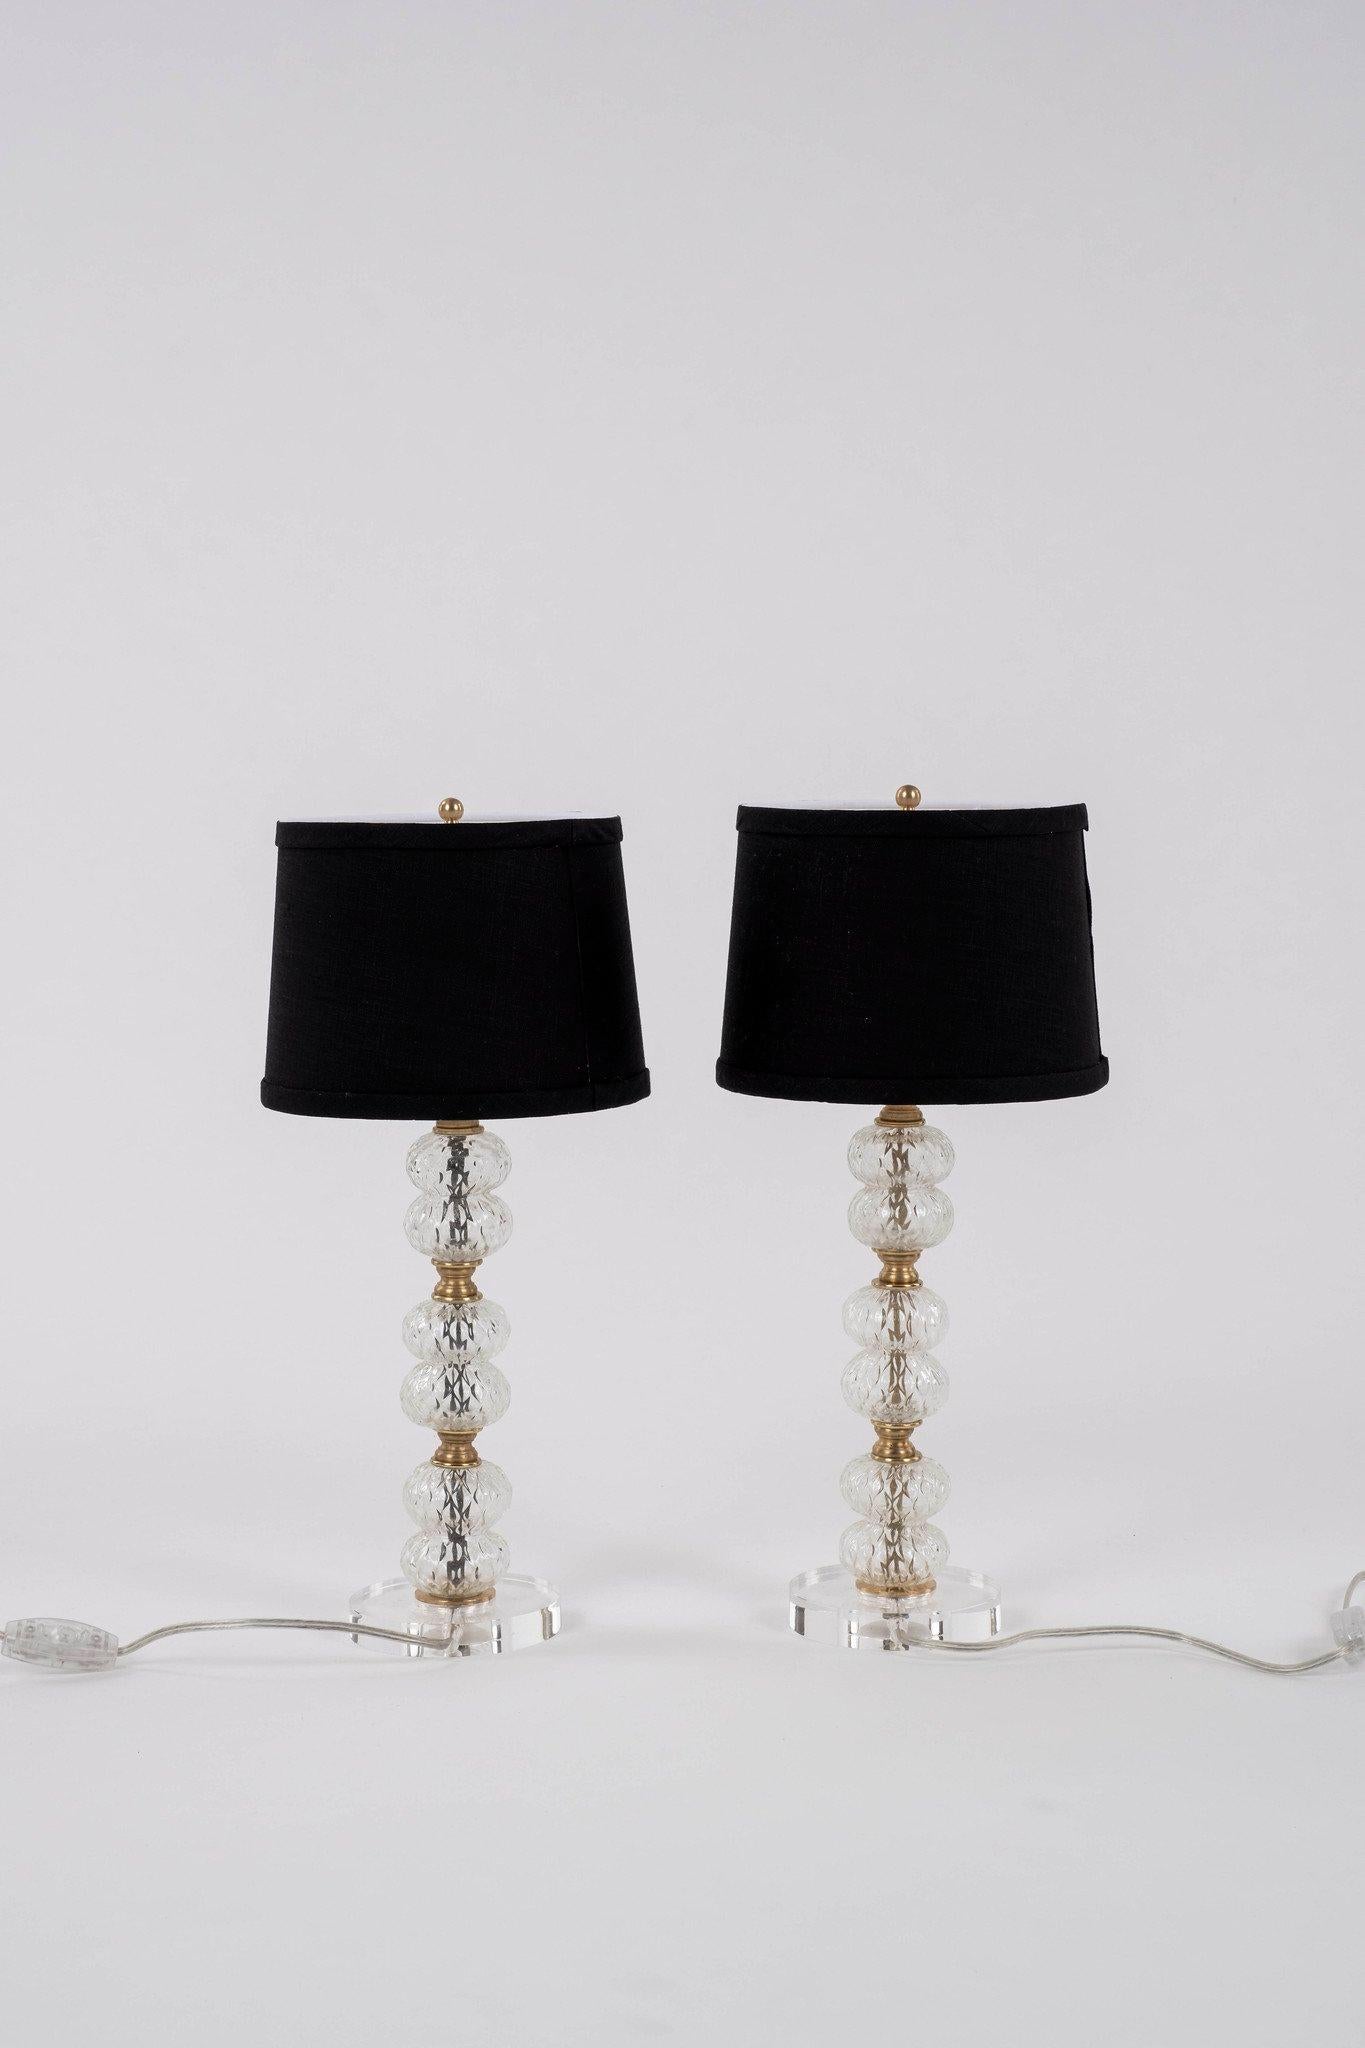 Vintage pair of glass, brass and lucite lamps with new black shades.

The shade's overall dimensions are 7 1/8